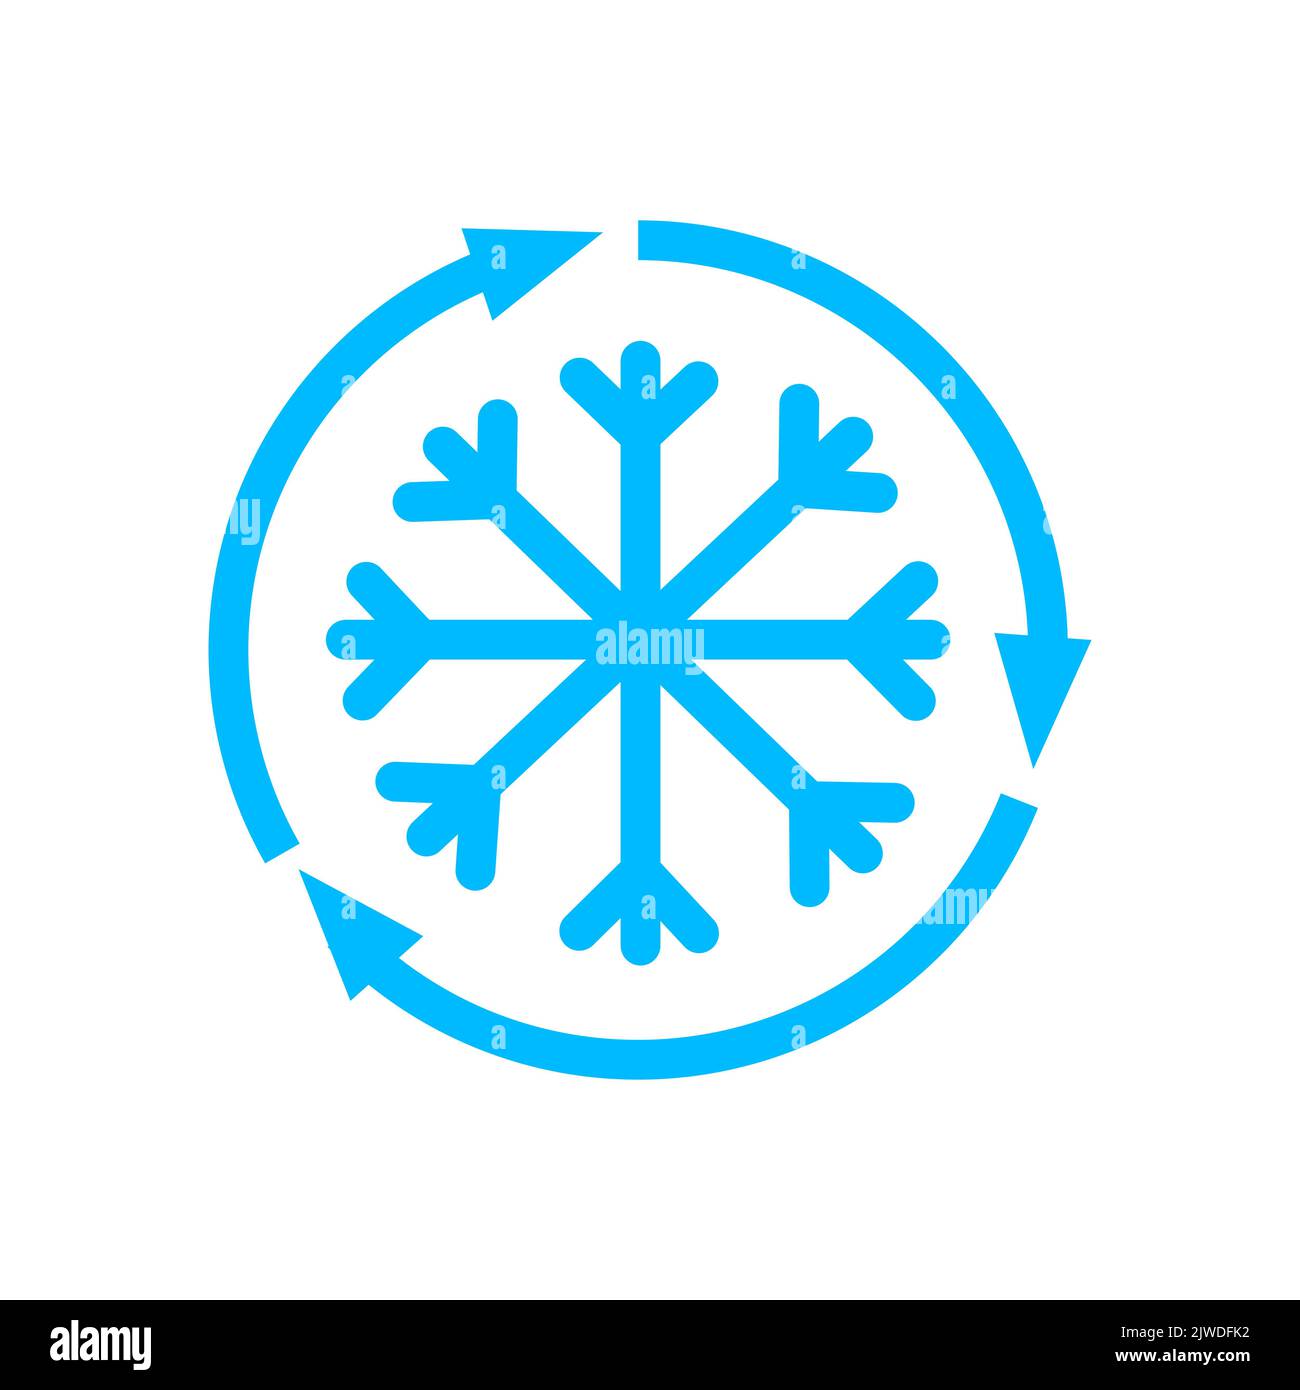 Abstract freezing vector flat icon illustration isolated on white background Stock Vector